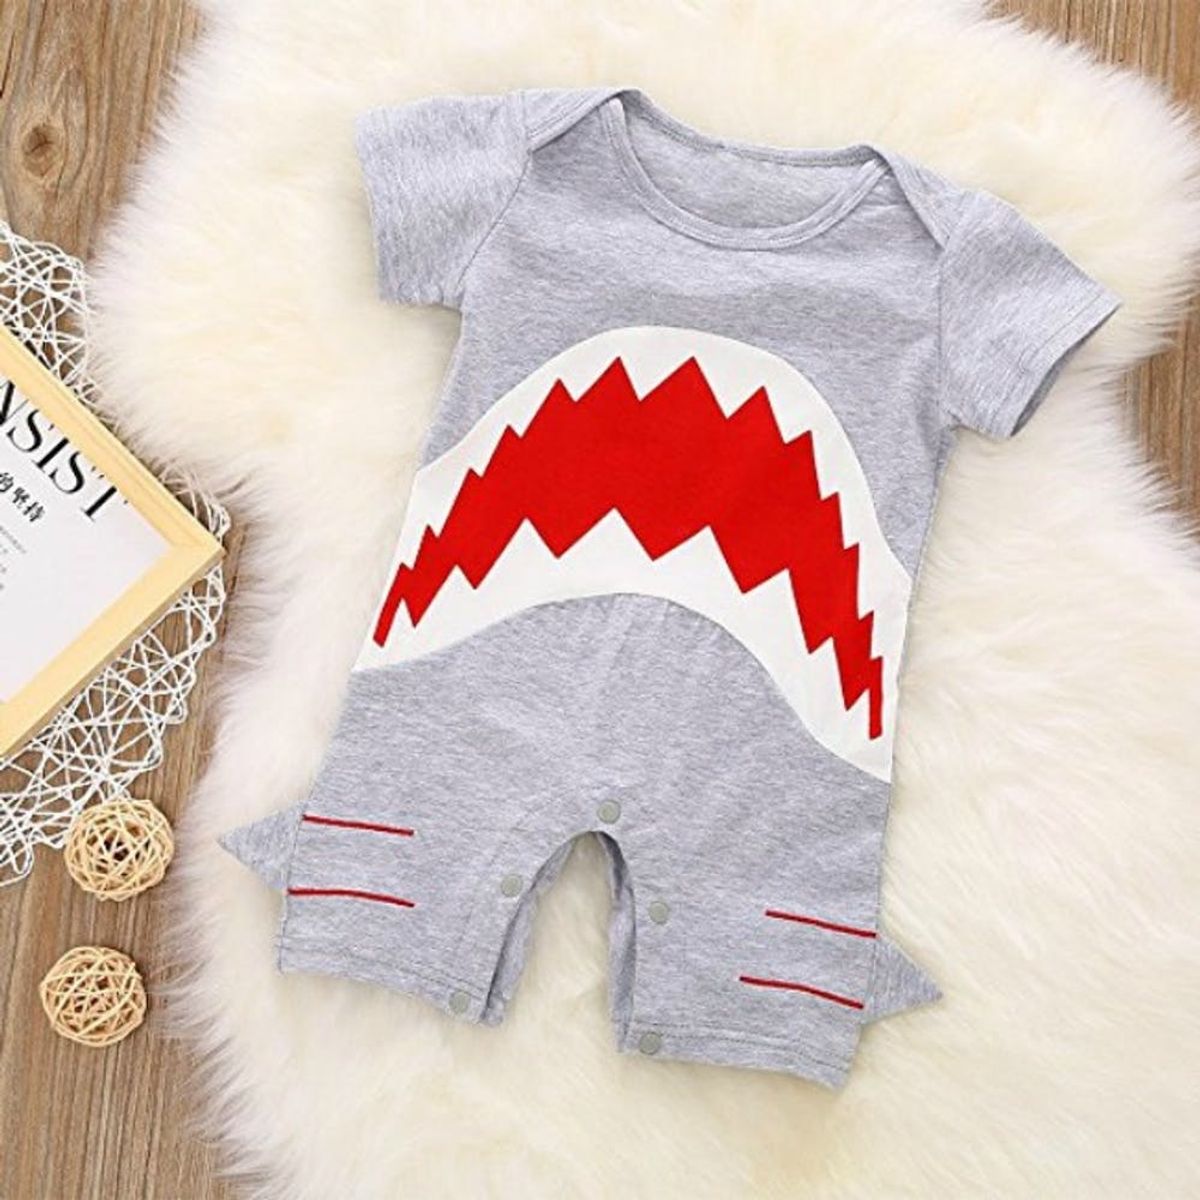 10 Adorable Baby Onesies Your Pregnant BFF Will Love